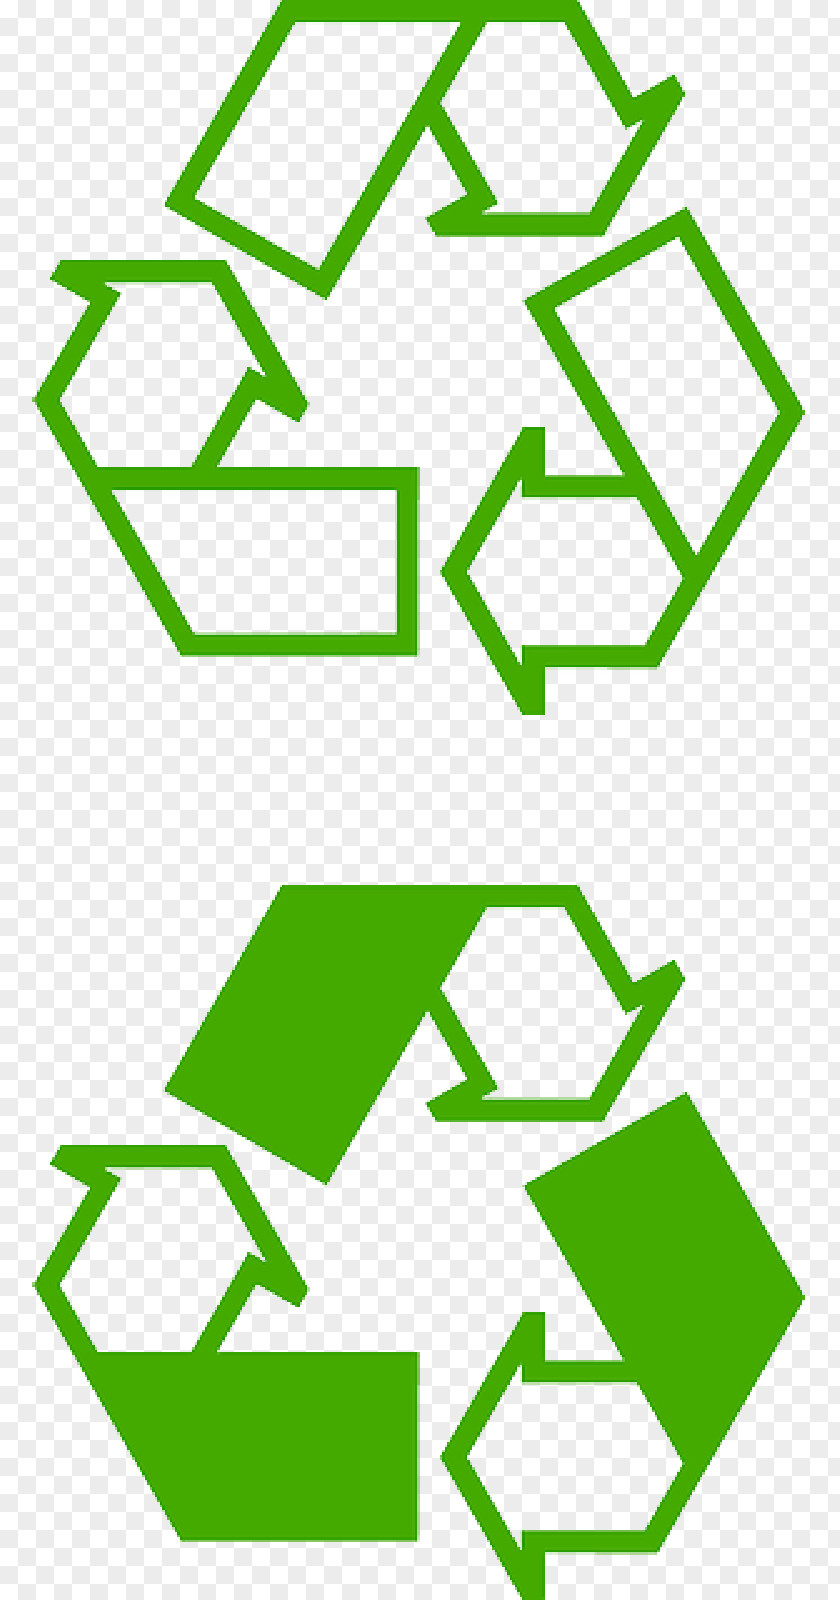 Go Green Recycle Graphic Recycling Symbol Clip Art PNG